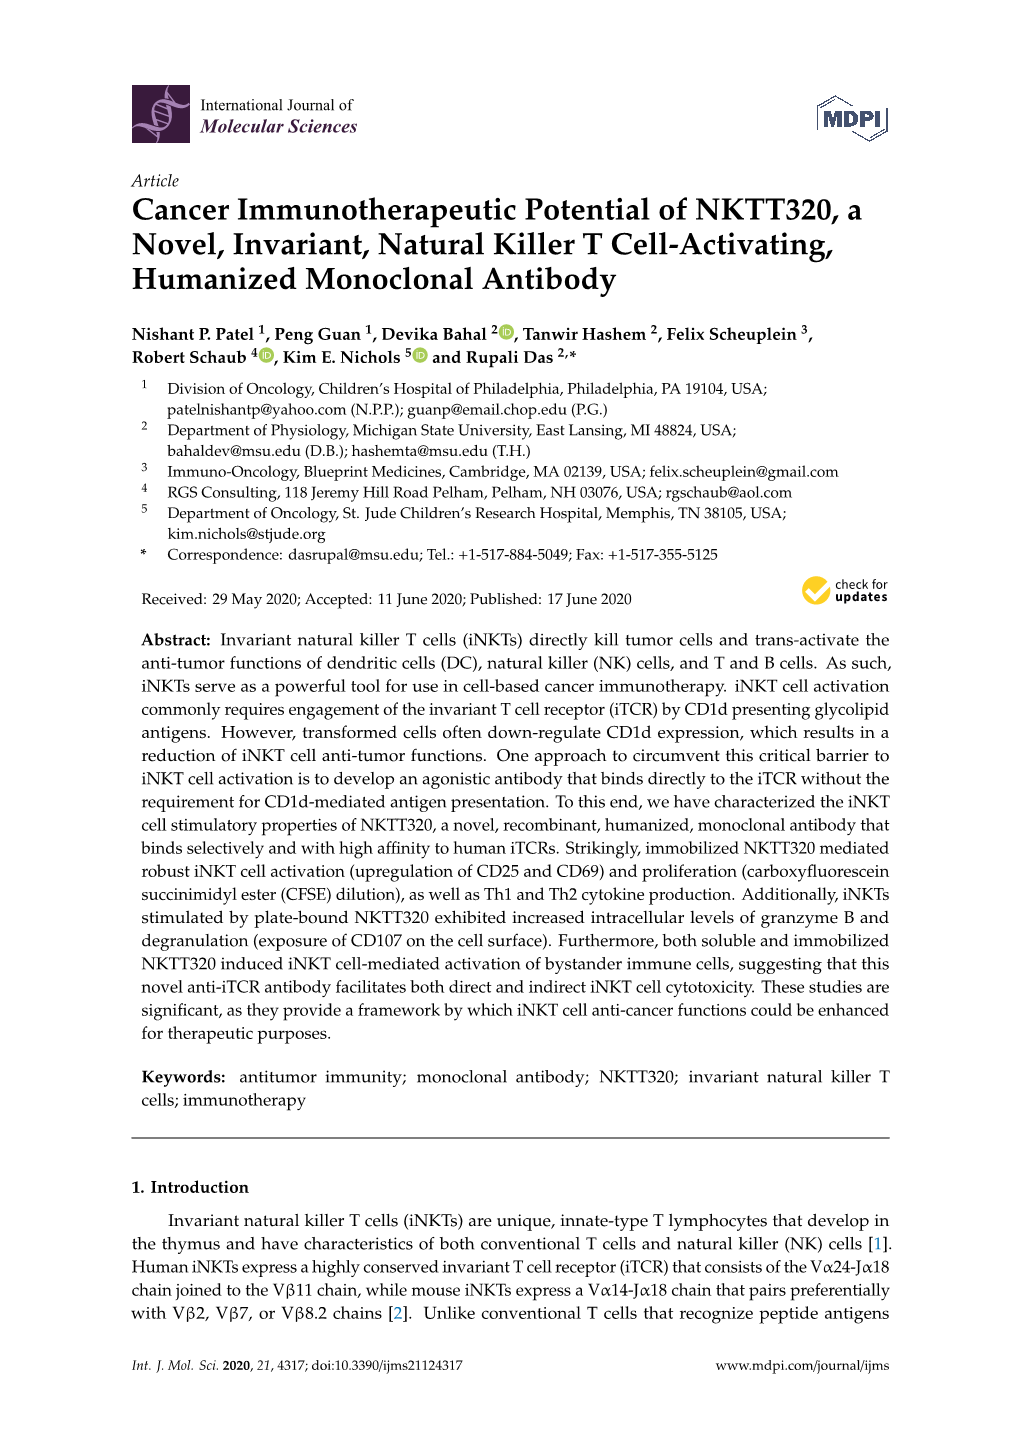 Cancer Immunotherapeutic Potential of NKTT320, a Novel, Invariant, Natural Killer T Cell-Activating, Humanized Monoclonal Antibody